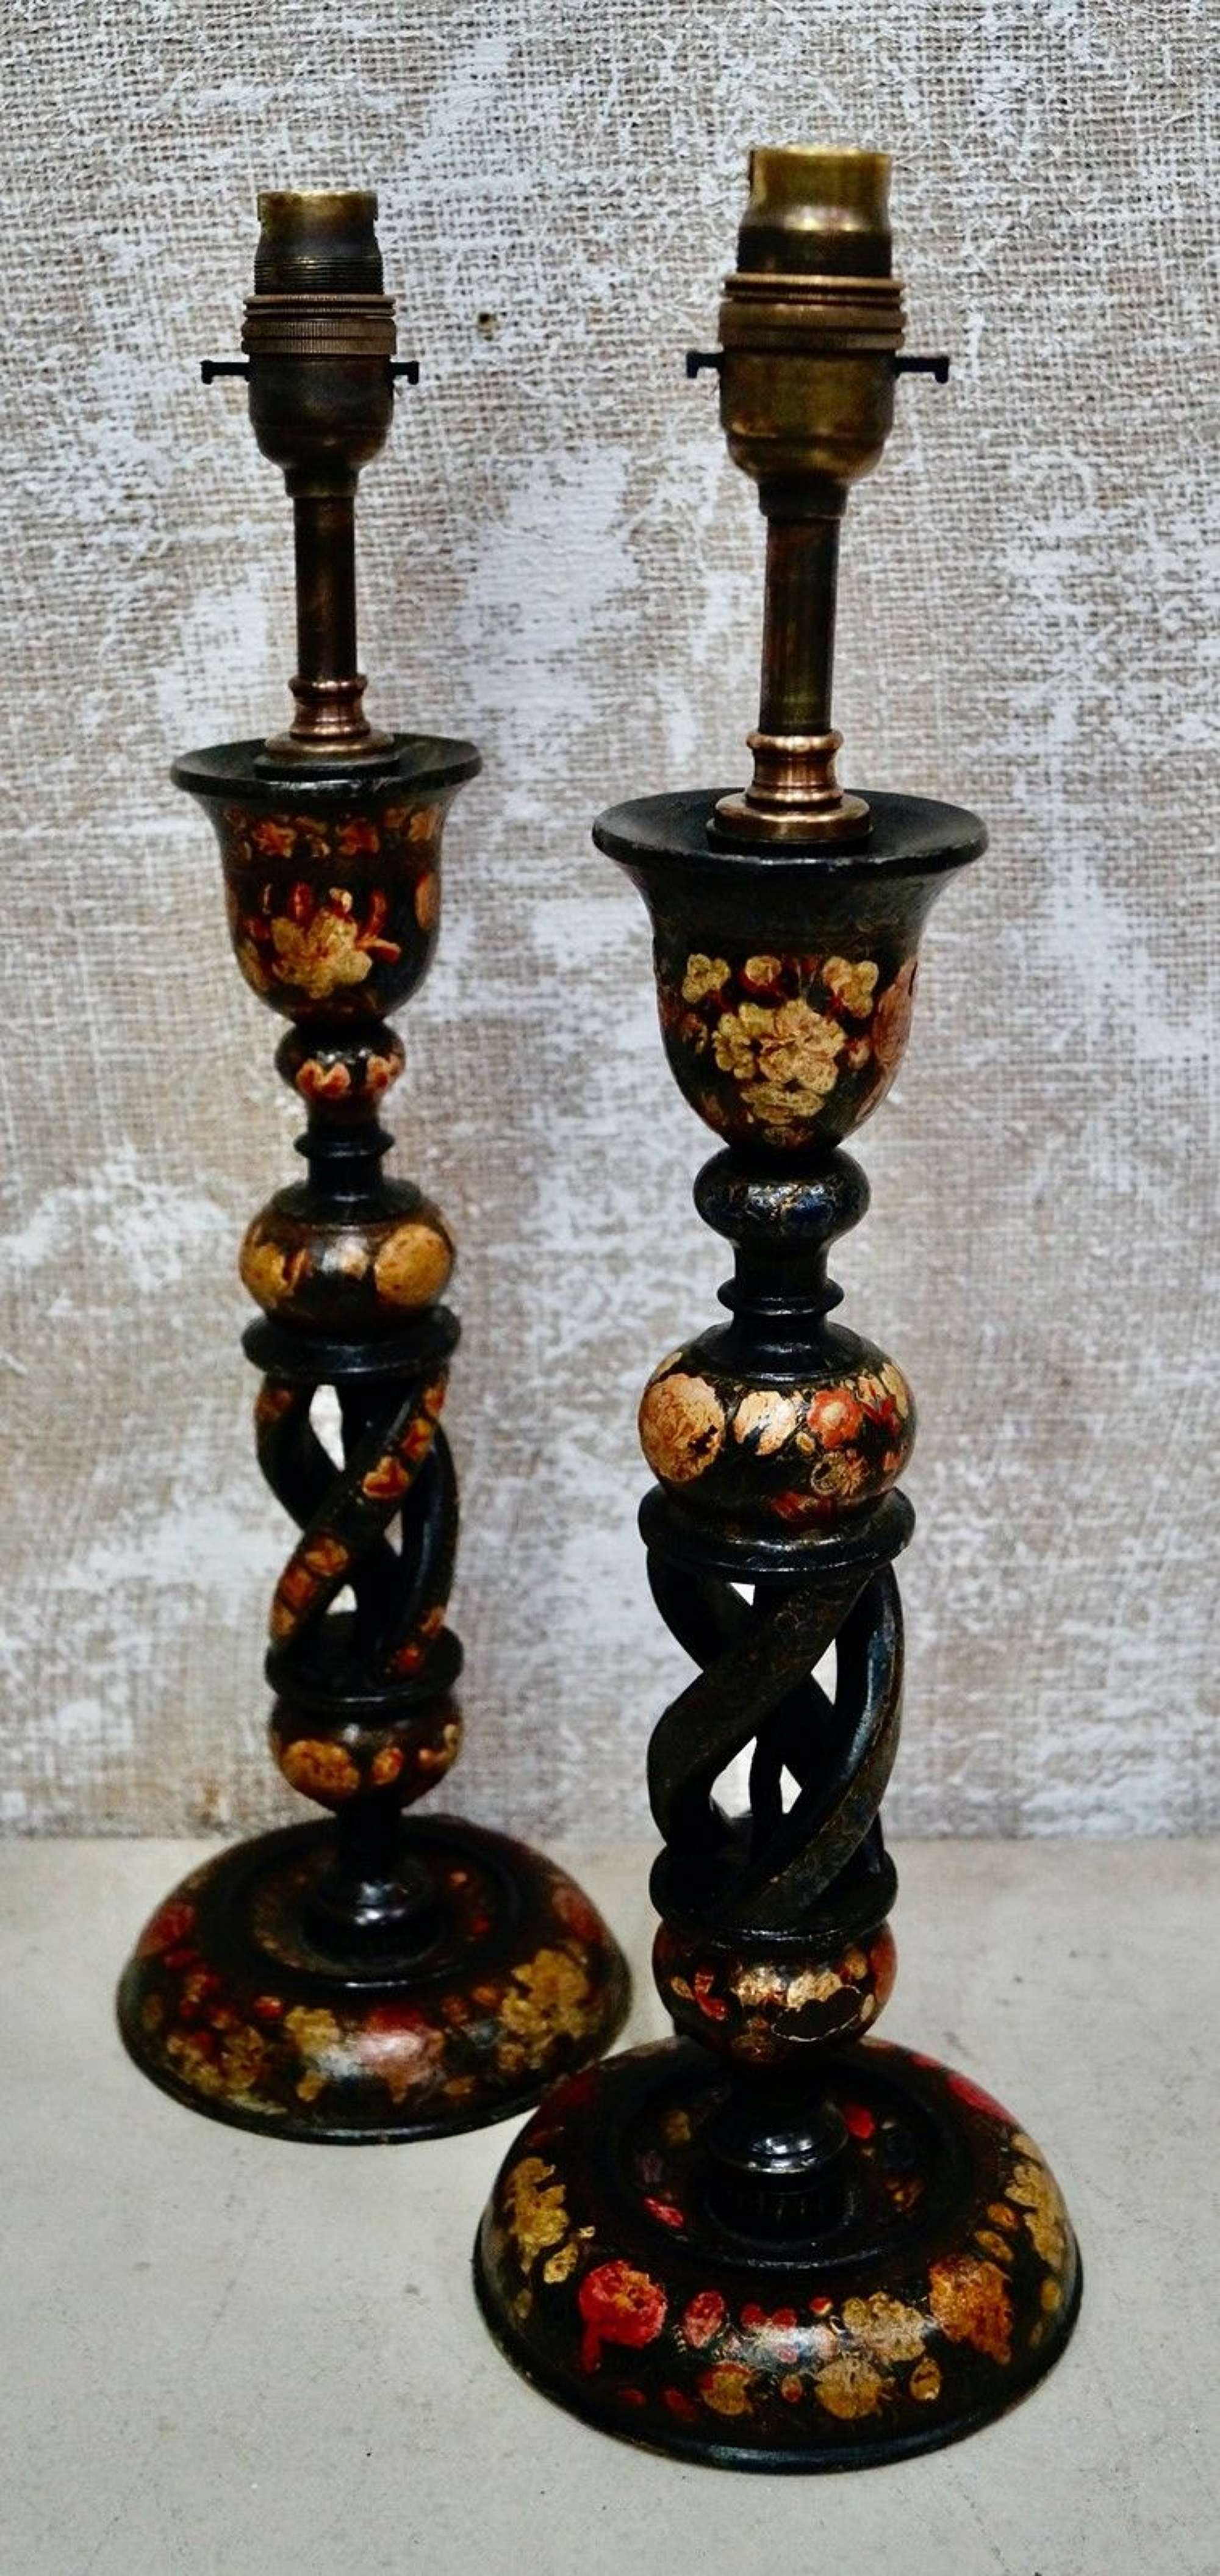 A Pair of Antique Kashmiri Candlestick Table Lamps